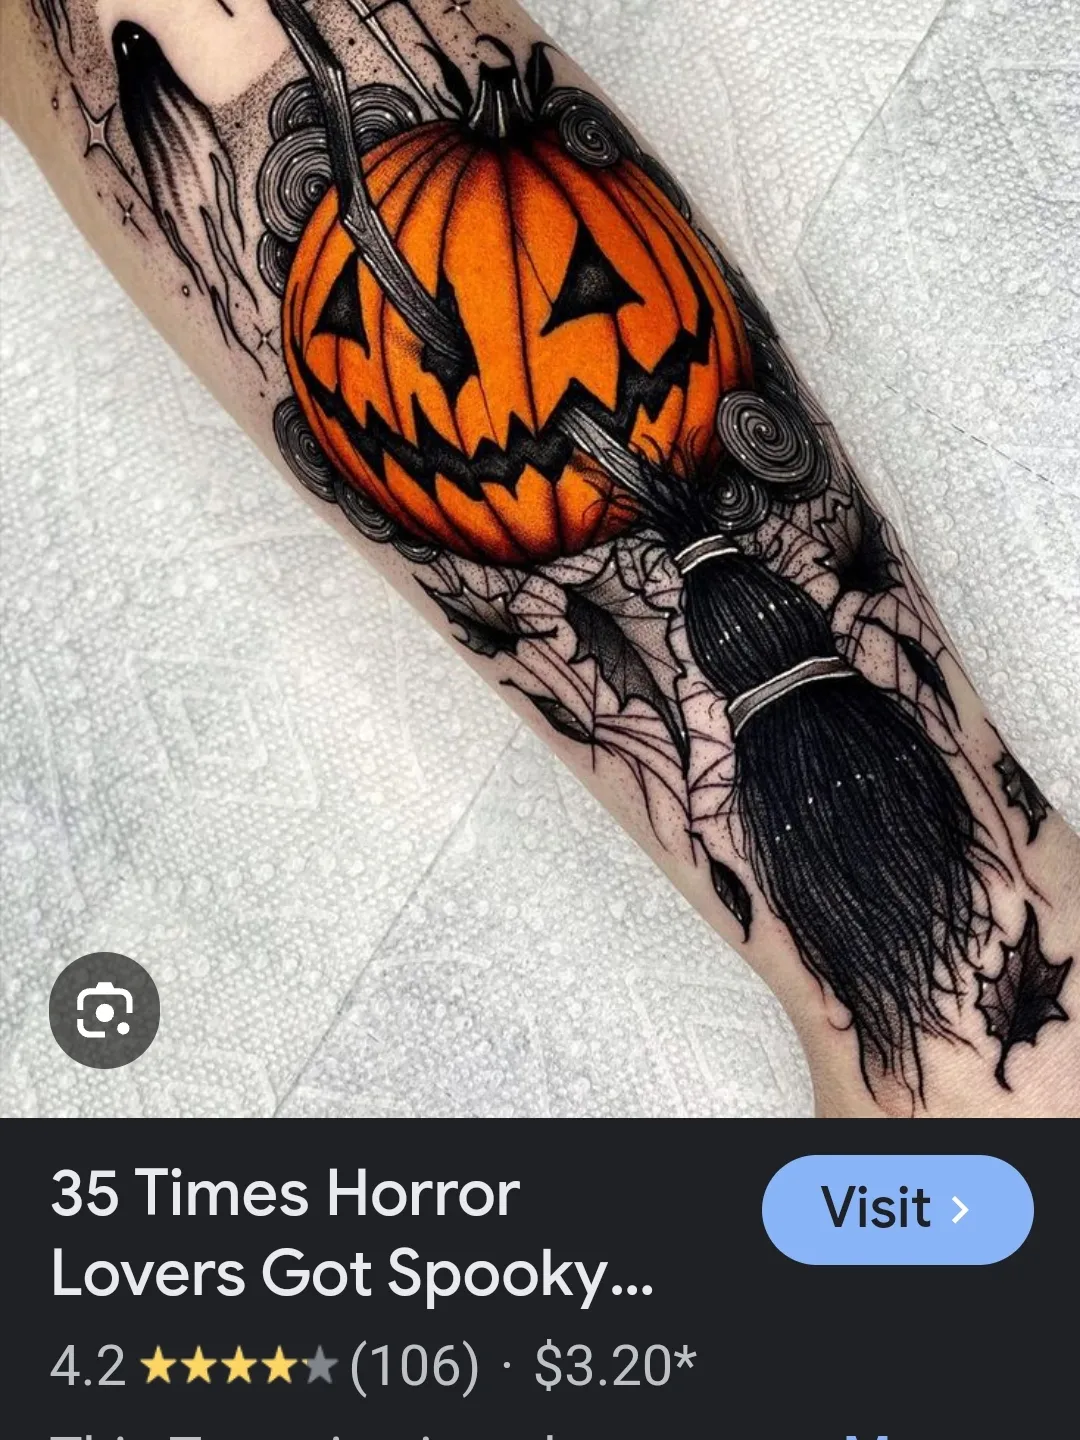 Made a start a friend's horror leg sleeve last week. Been tattooing just  under 2 years. : r/tattooing